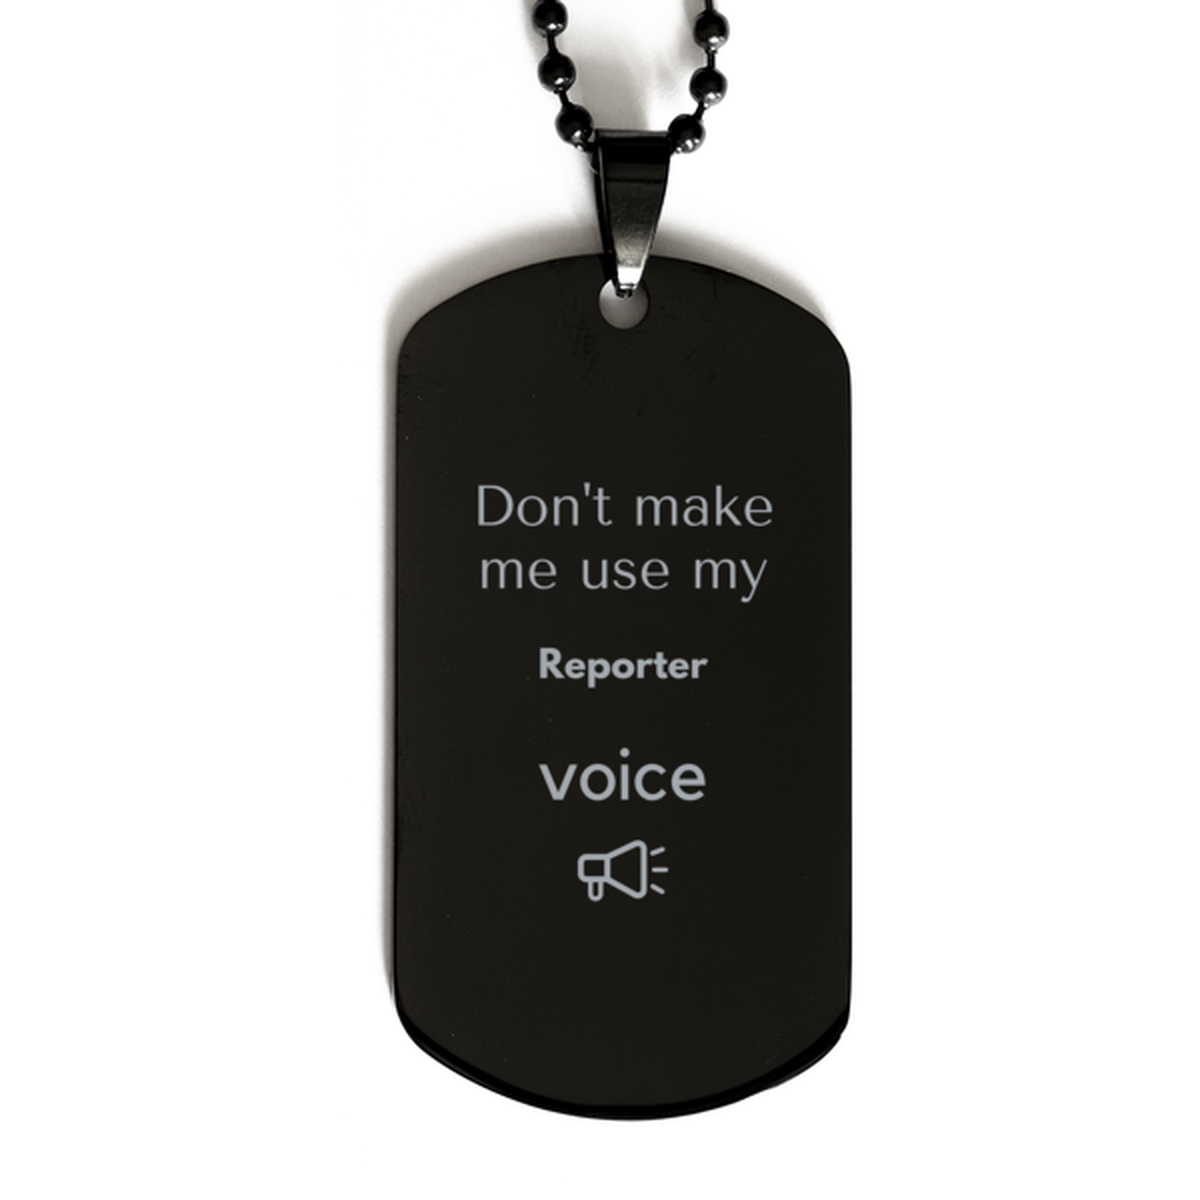 Don't make me use my Reporter voice, Sarcasm Reporter Gifts, Christmas Reporter Black Dog Tag Birthday Unique Gifts For Reporter Coworkers, Men, Women, Colleague, Friends